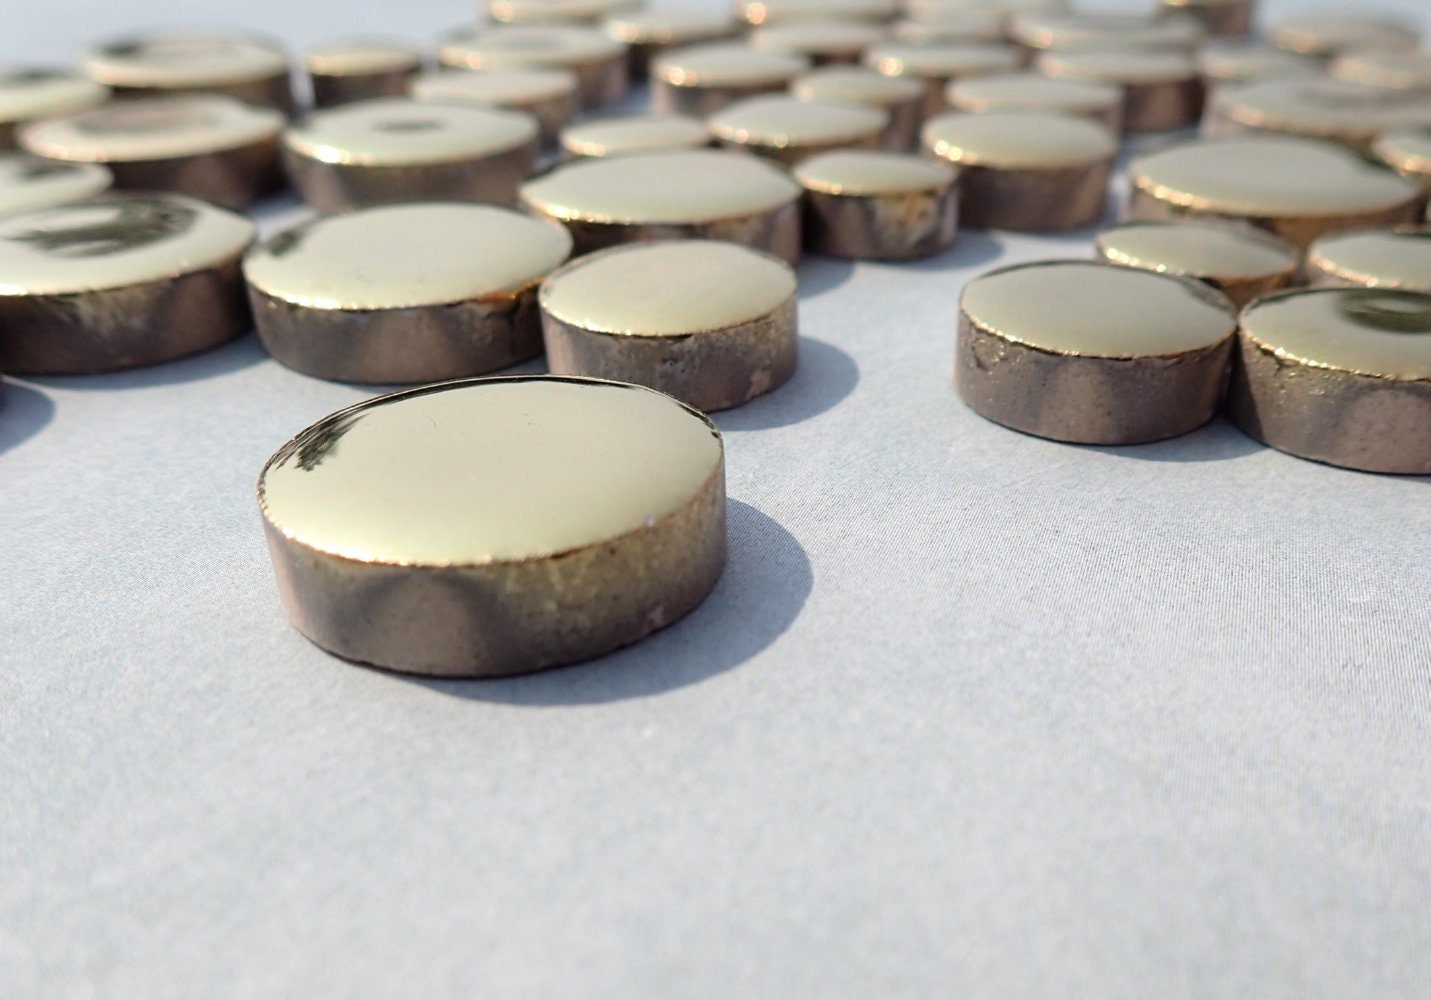 Gold Circles Mosaic Tiles - 50g Ceramic in Mix of 3 Sizes 1/2" and 3/4" and 5/8" Metallic